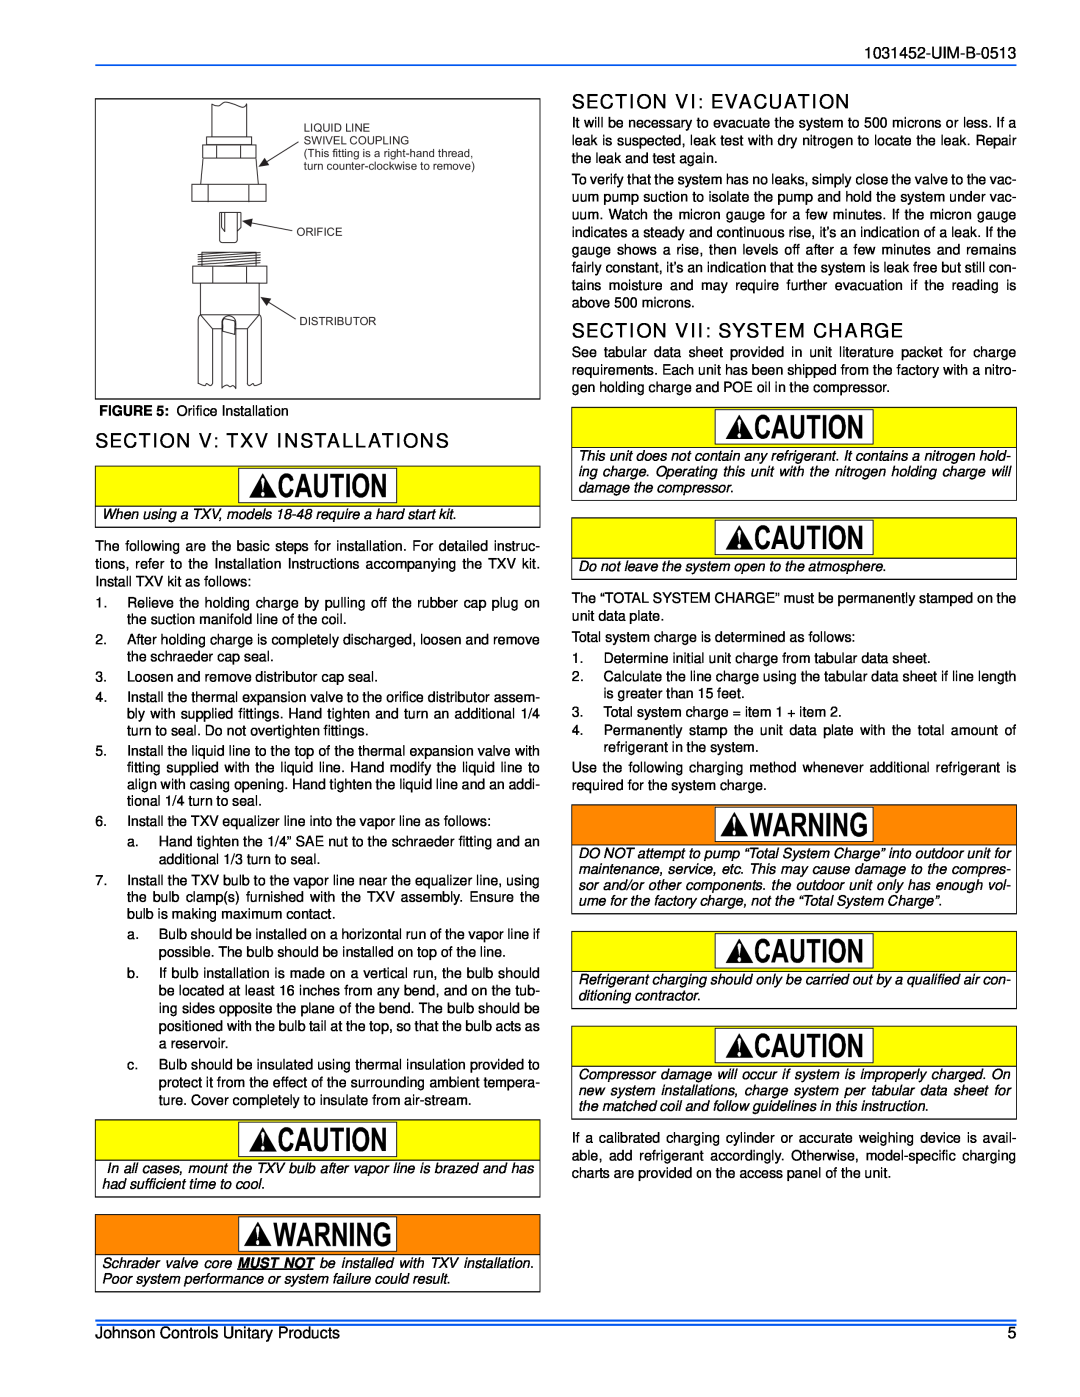 Johnson Controls 13 SEER - GCGD Section V Txv Installations, Section Vi Evacuation, Section Vii: System Charge, UIM-B-0513 